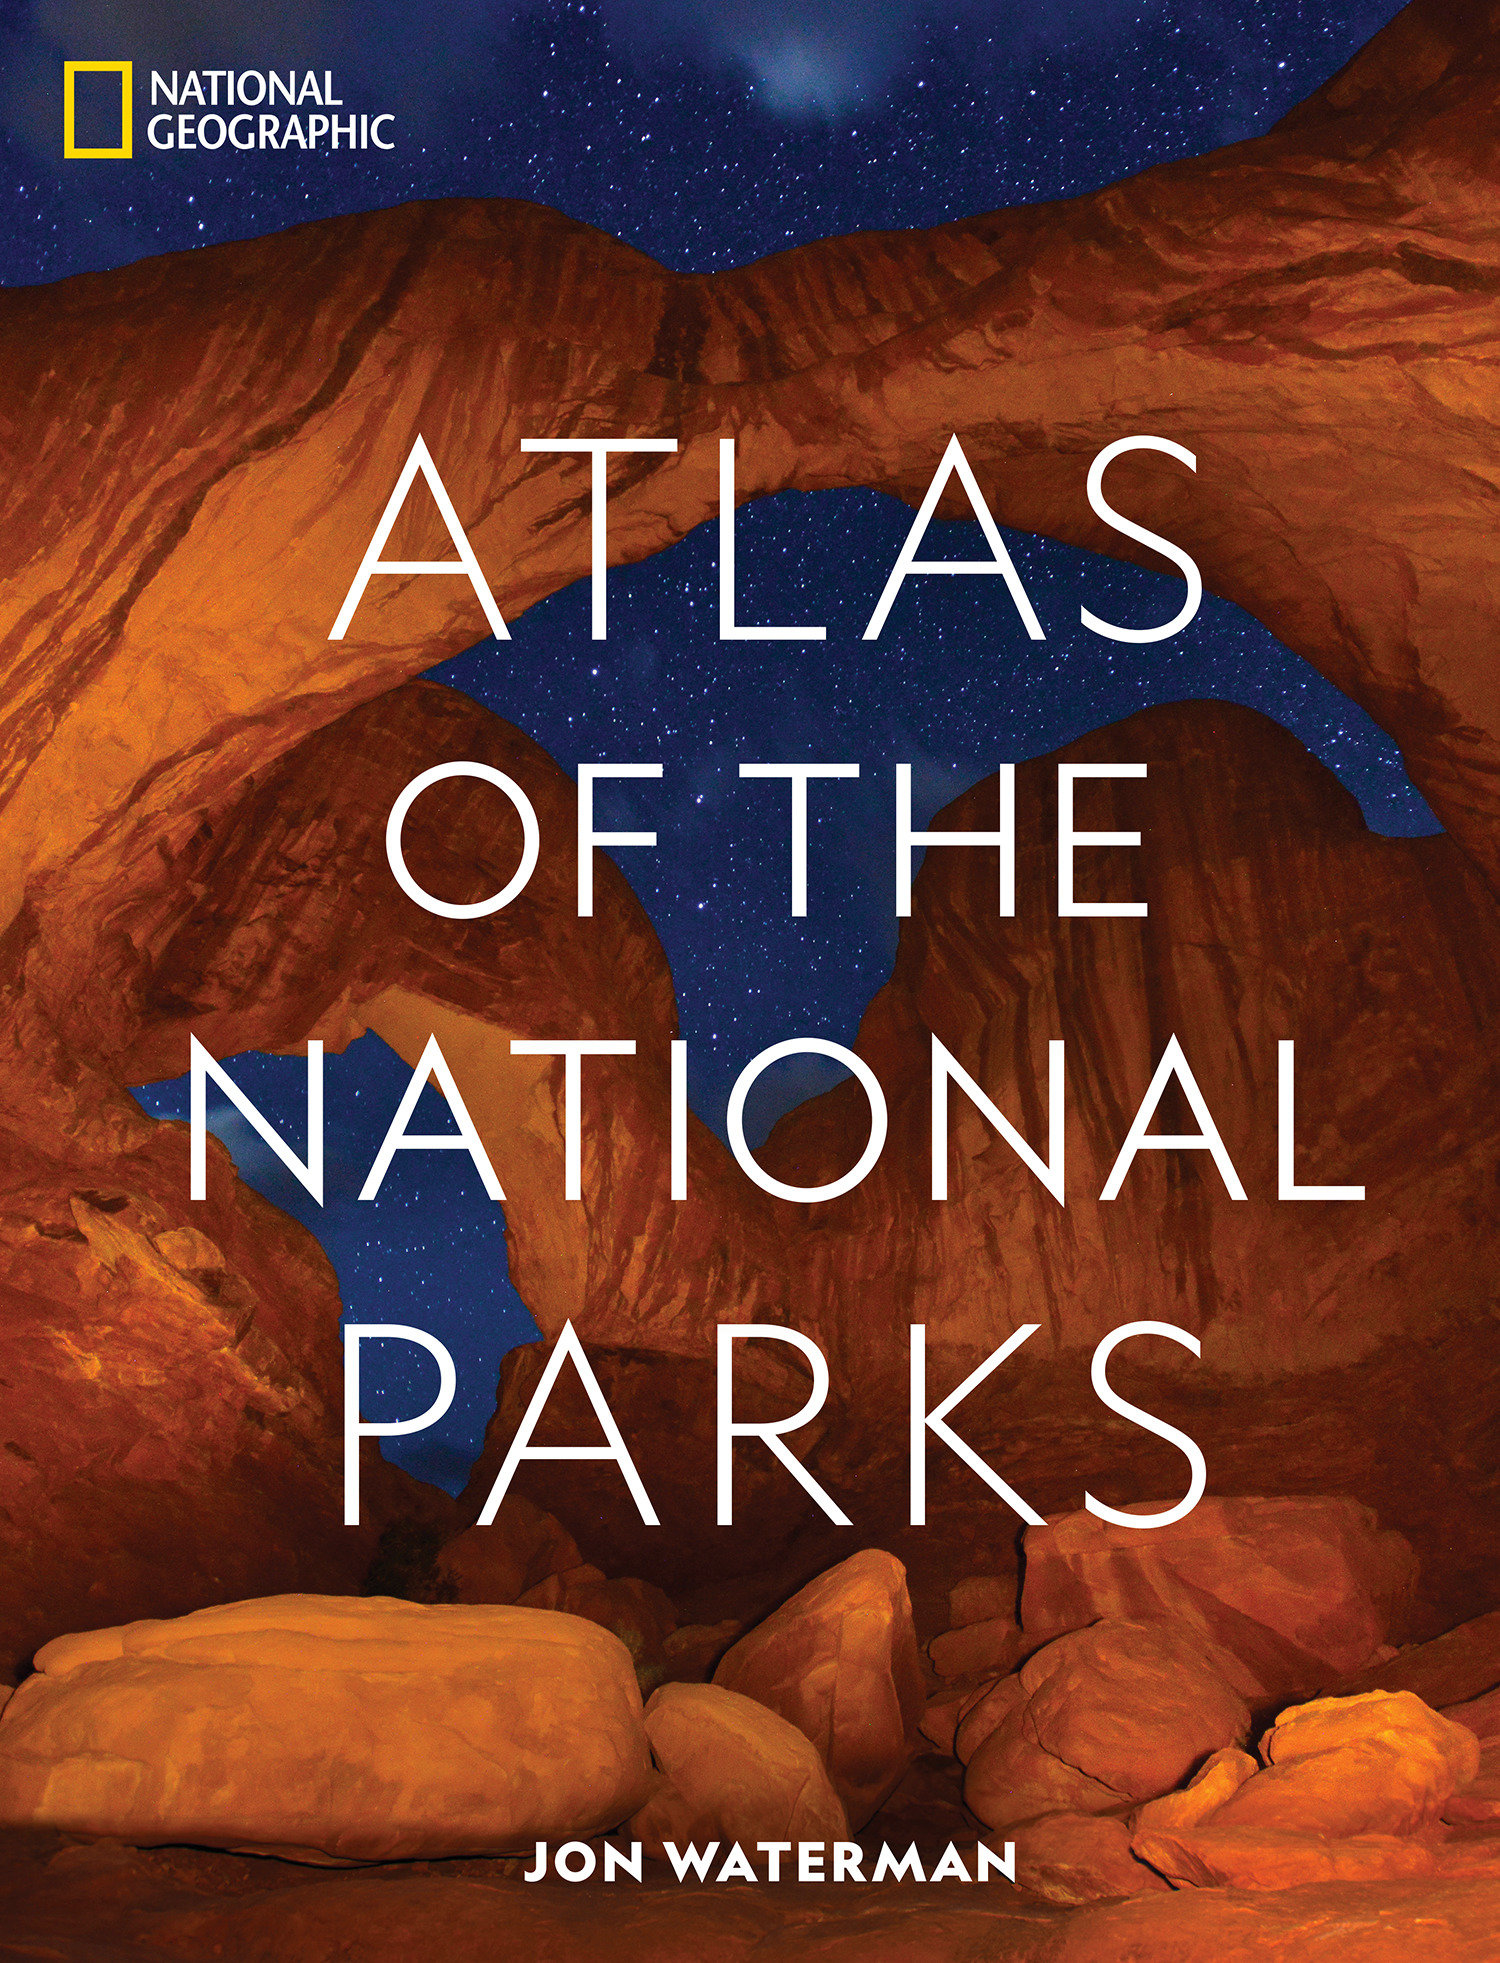 National Geographic Atlas Of The National Parks (Hardcover Book)